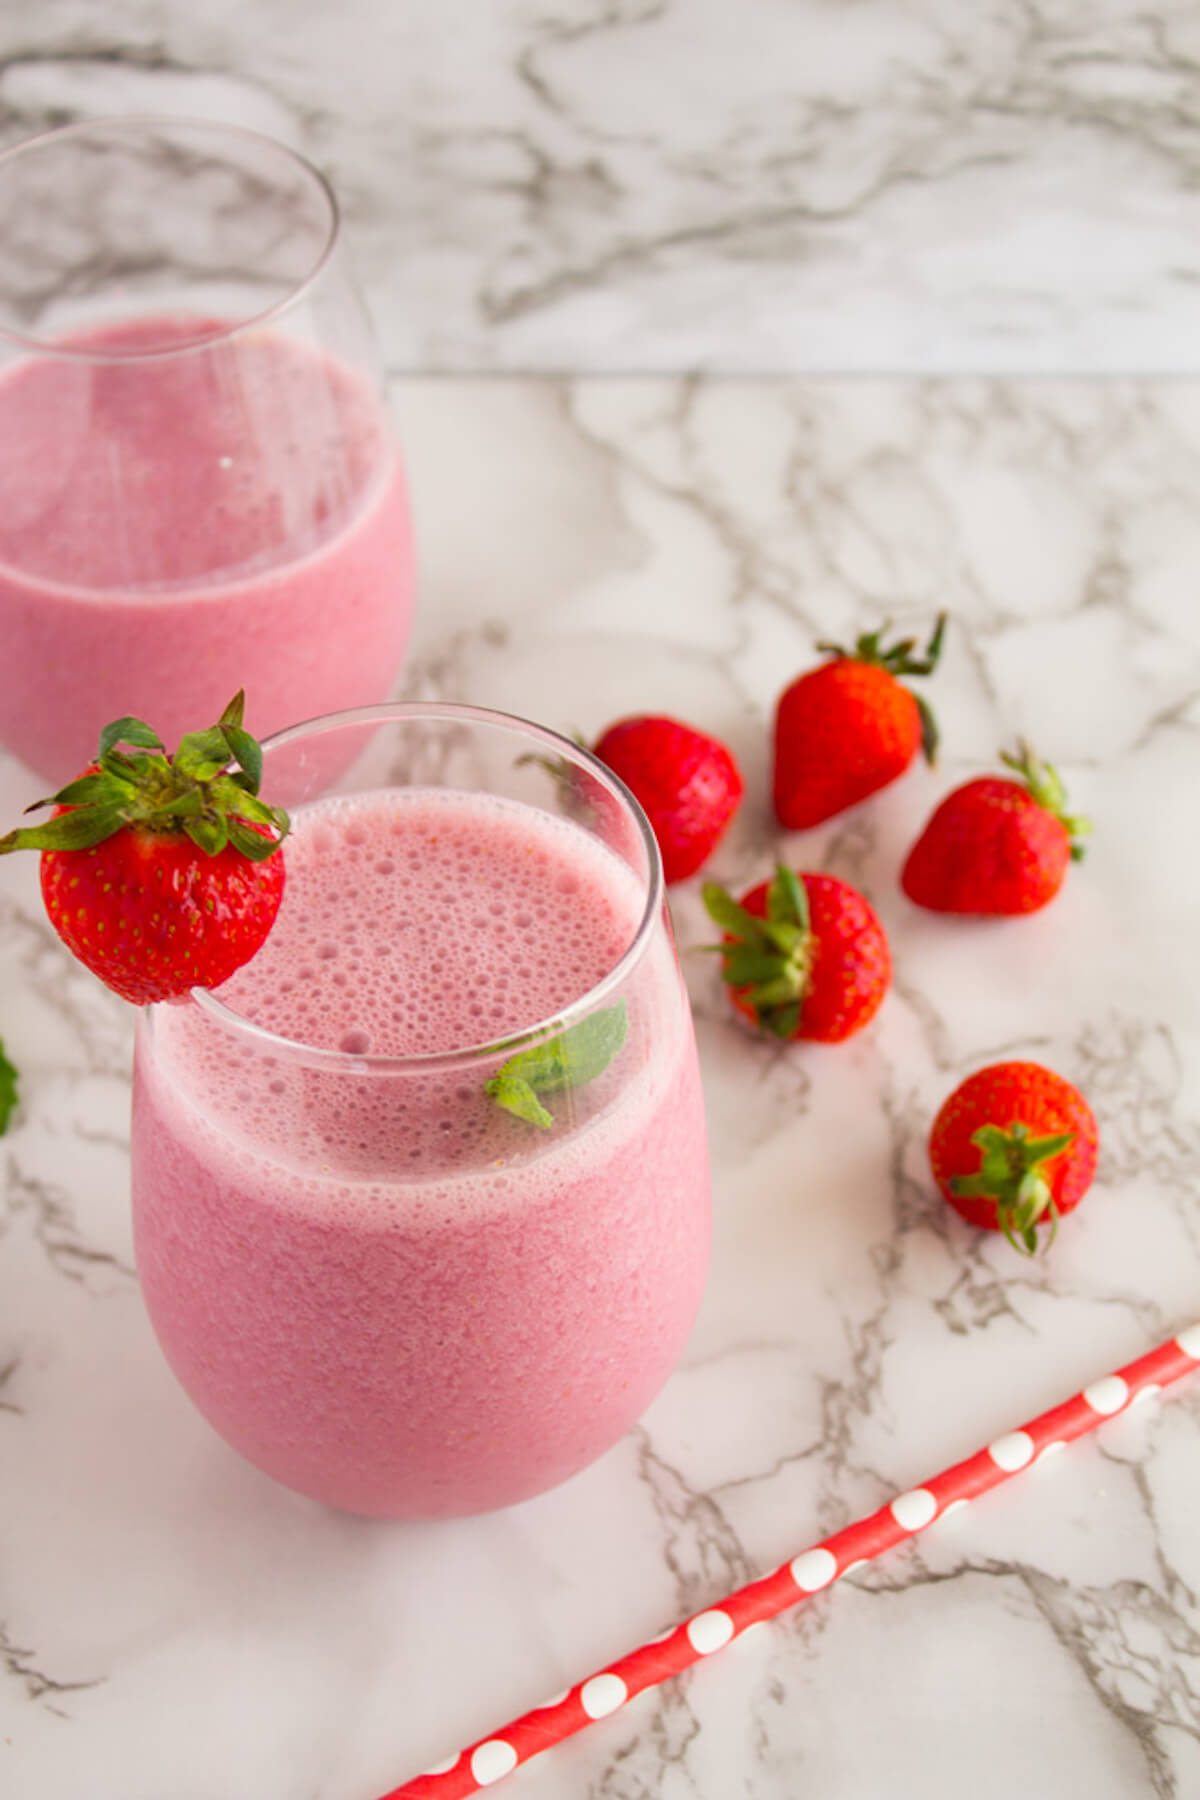 Simple Strawberry Smoothie with Mint - only 6 ingredients!